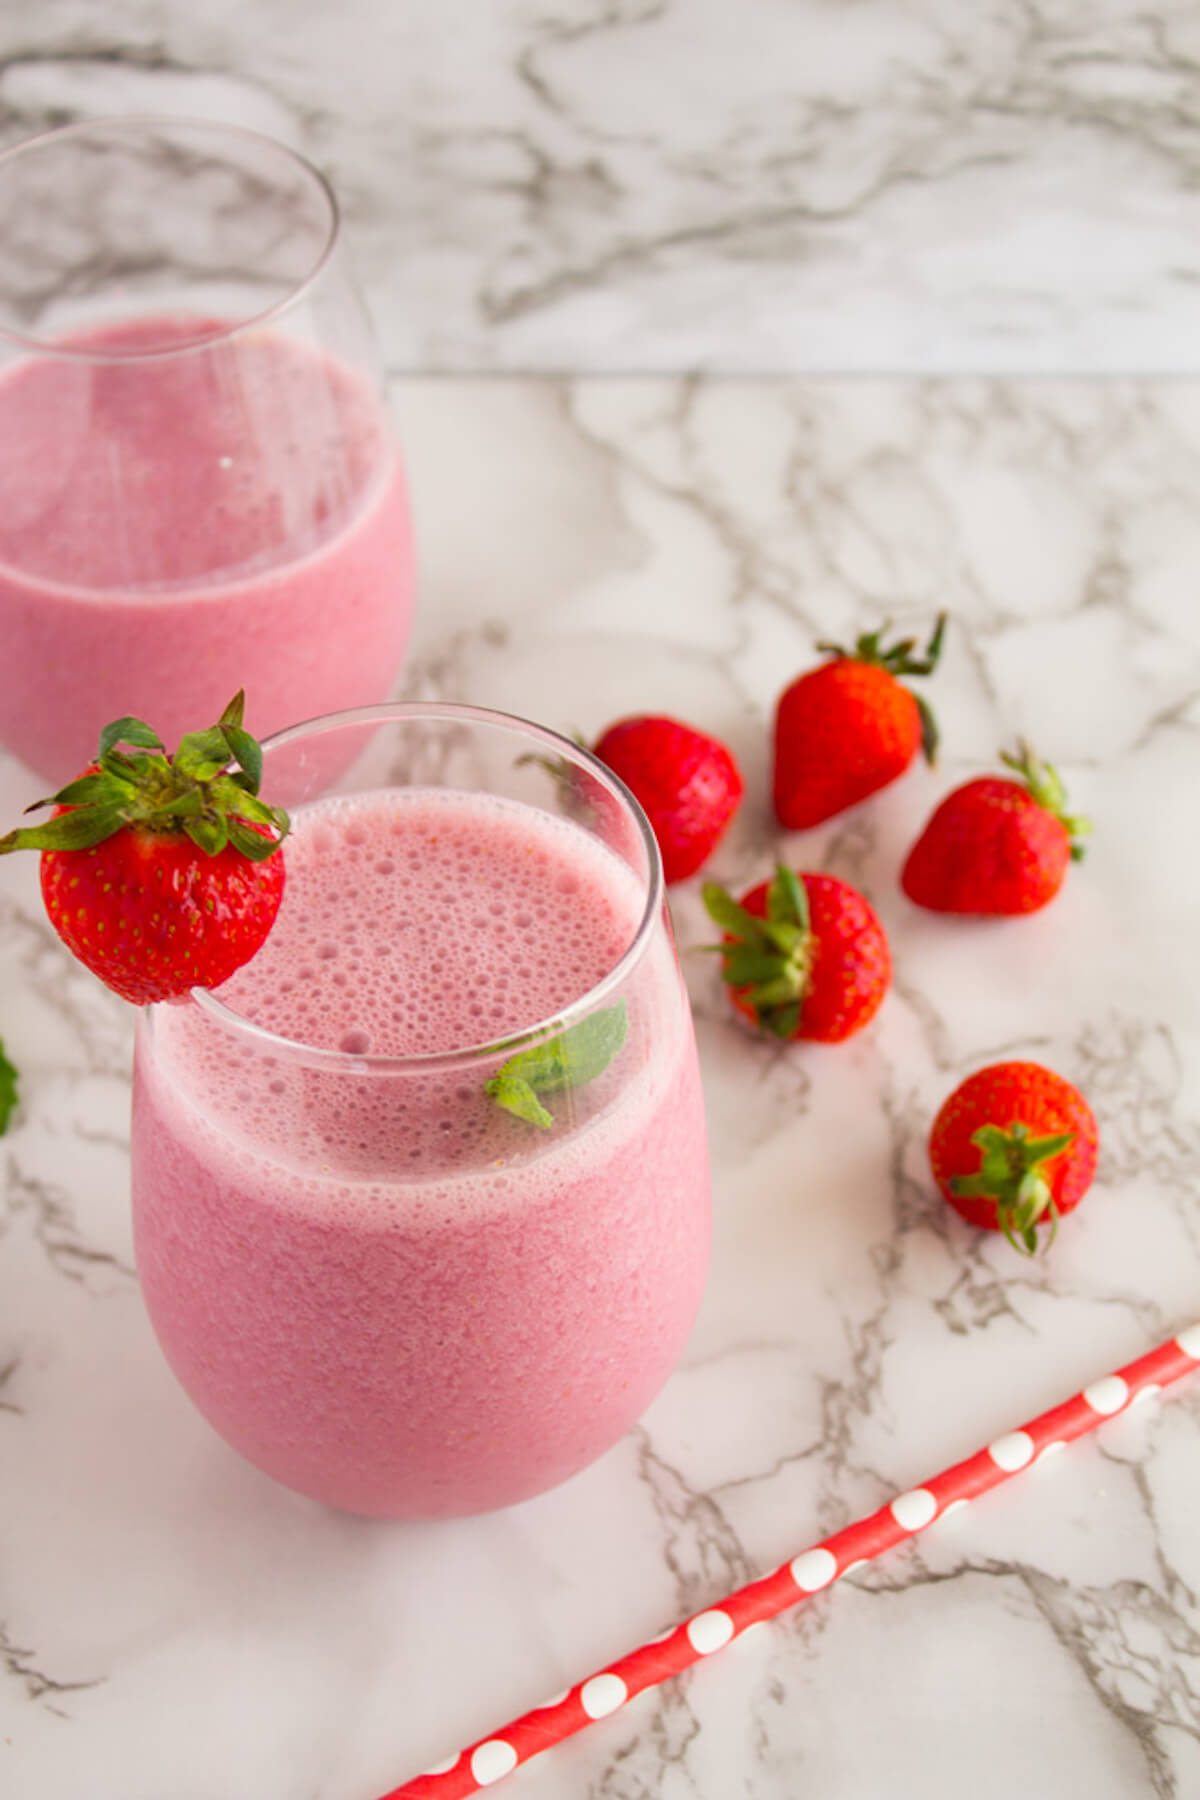 Simple Strawberry Smoothie with Mint - only 6 ingredients!